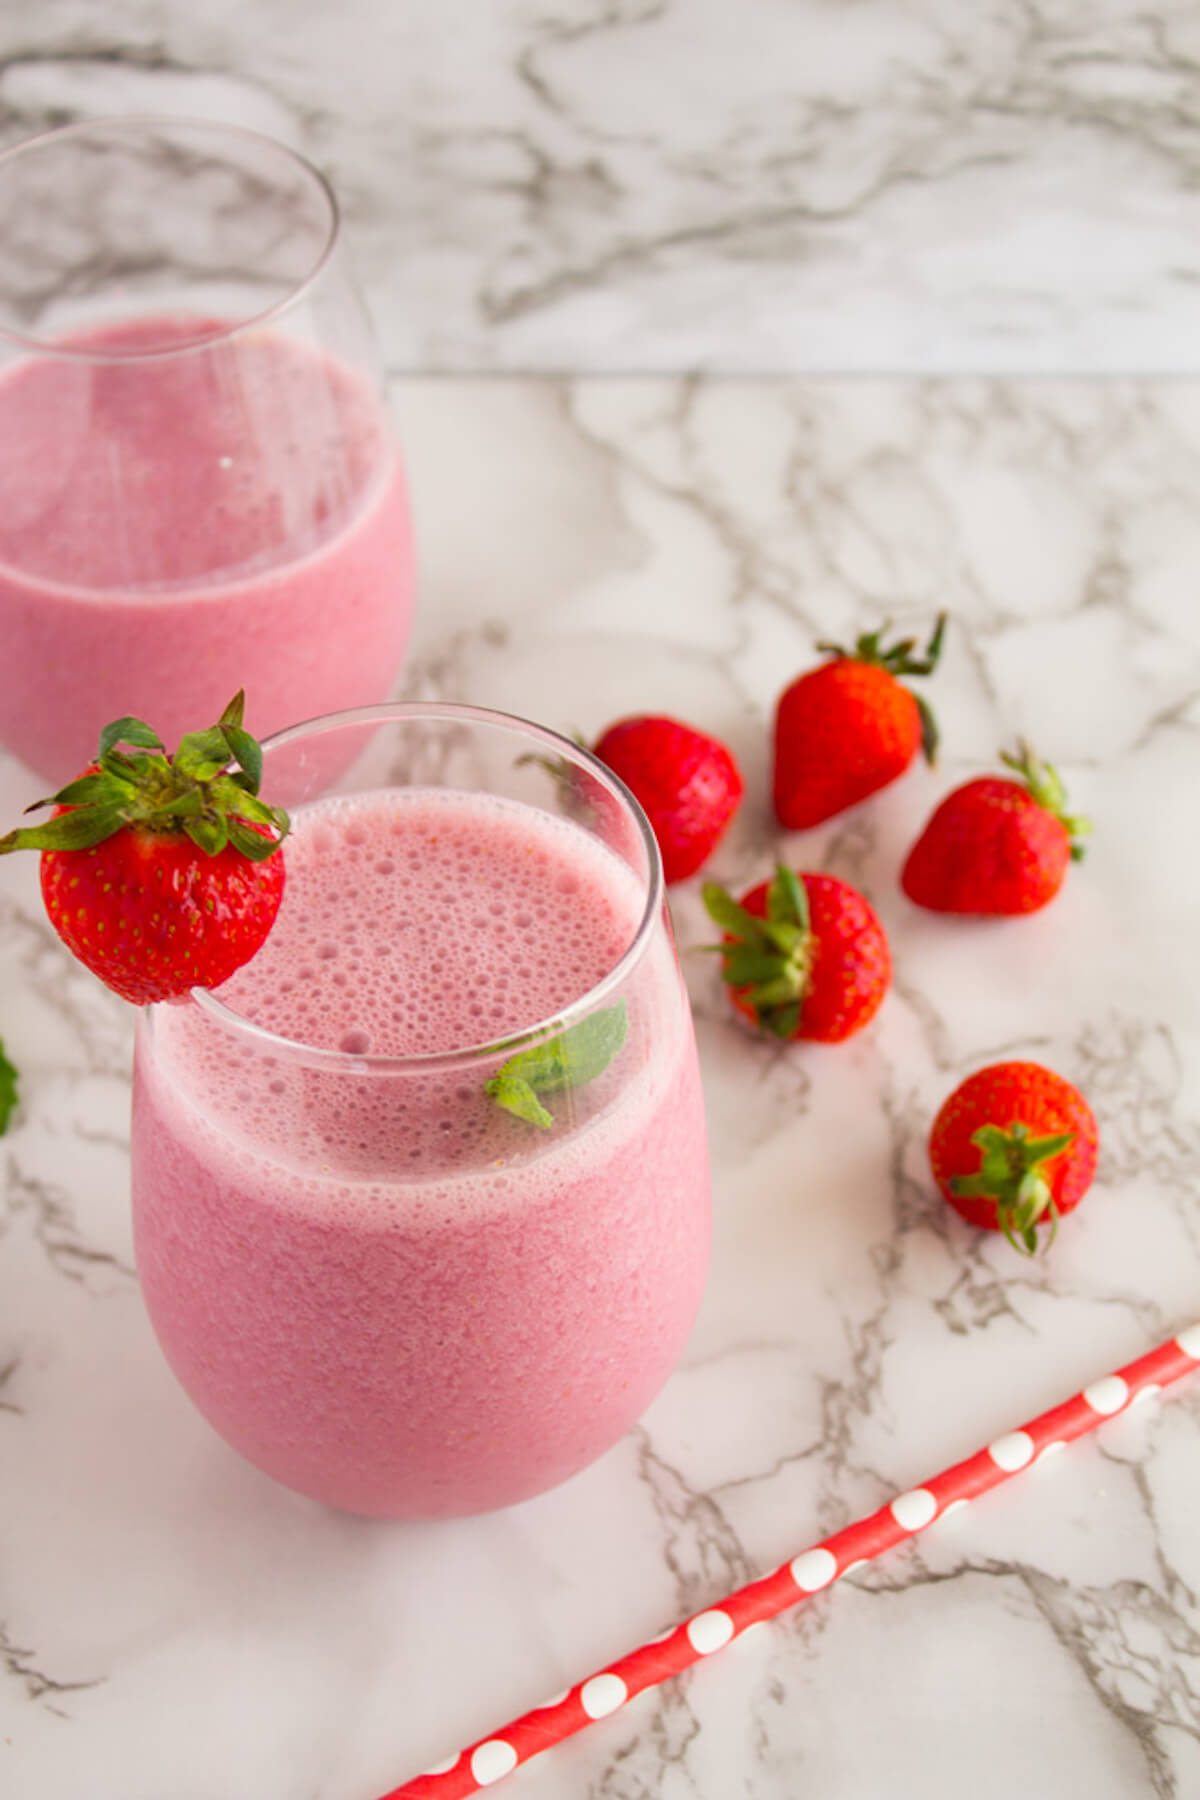 Simple Strawberry Smoothie with Mint - only 6 ingredients!